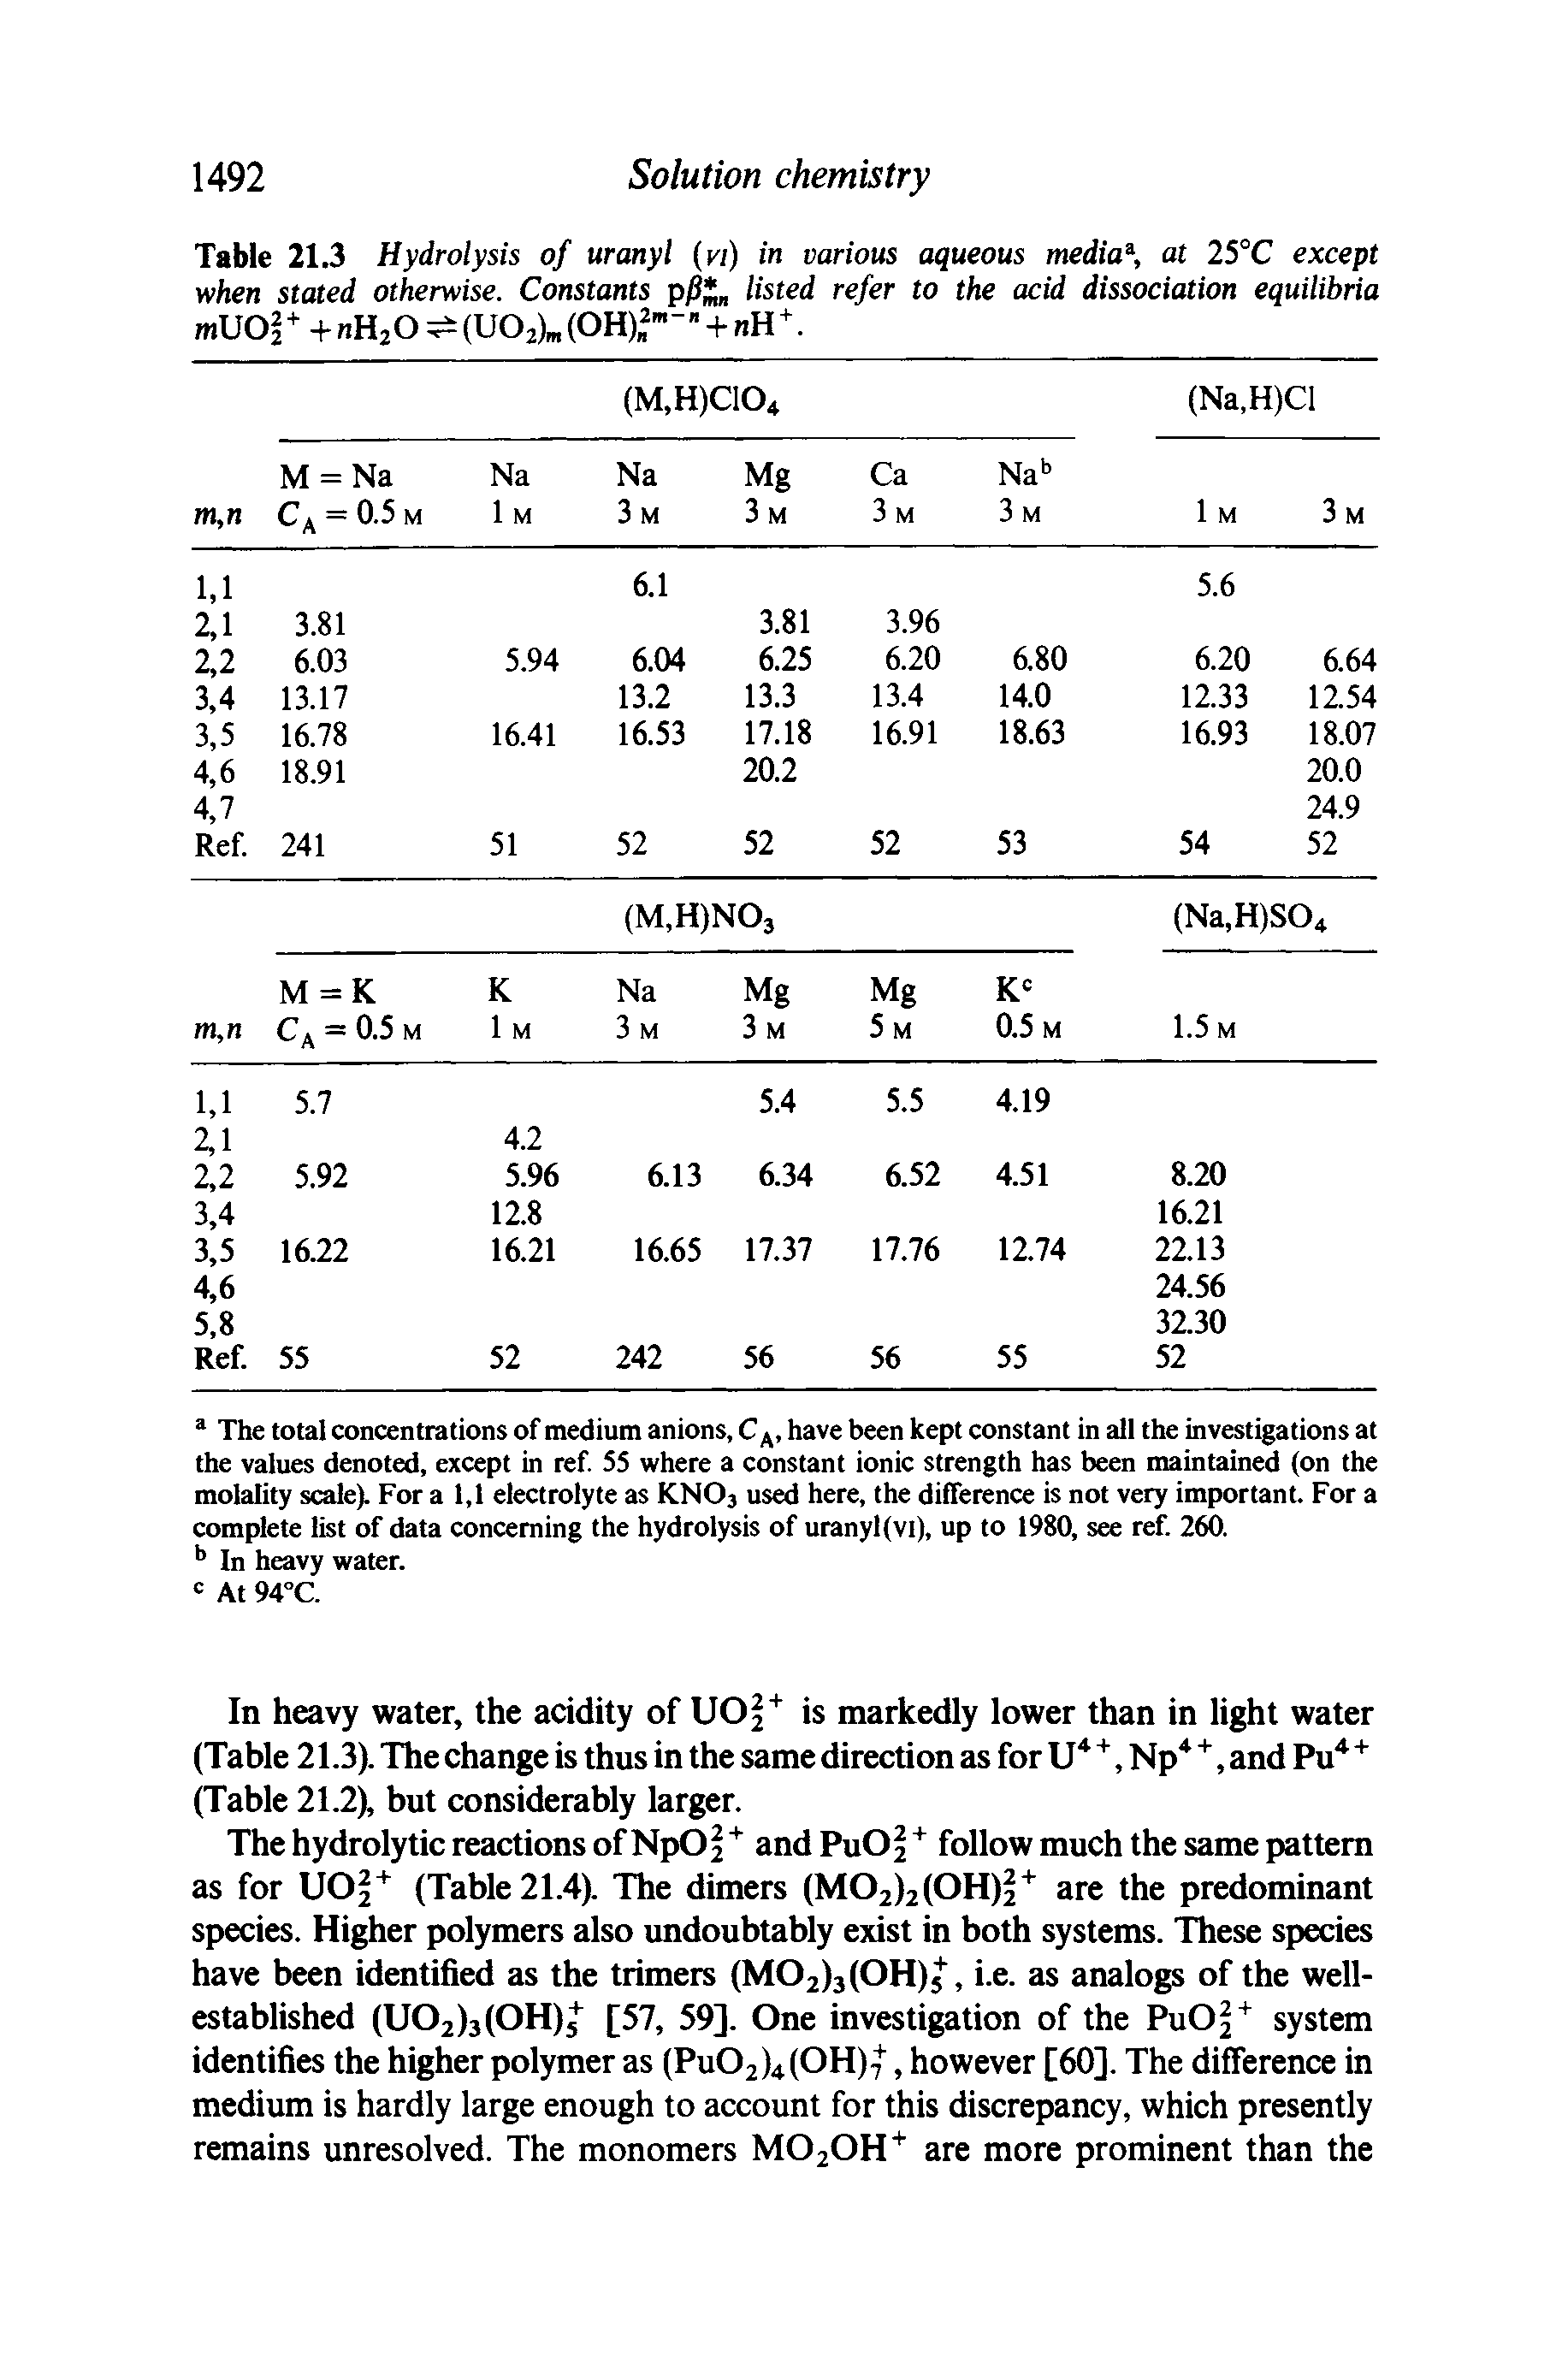 Table 21.3 Hydrolysis of uranyl (vi) in various aqueous media% at 25°C except when stated otherwise. Constants p/J listed refer to the acid dissociation equilibria mUOi + + nHjO (UO ) + H +.